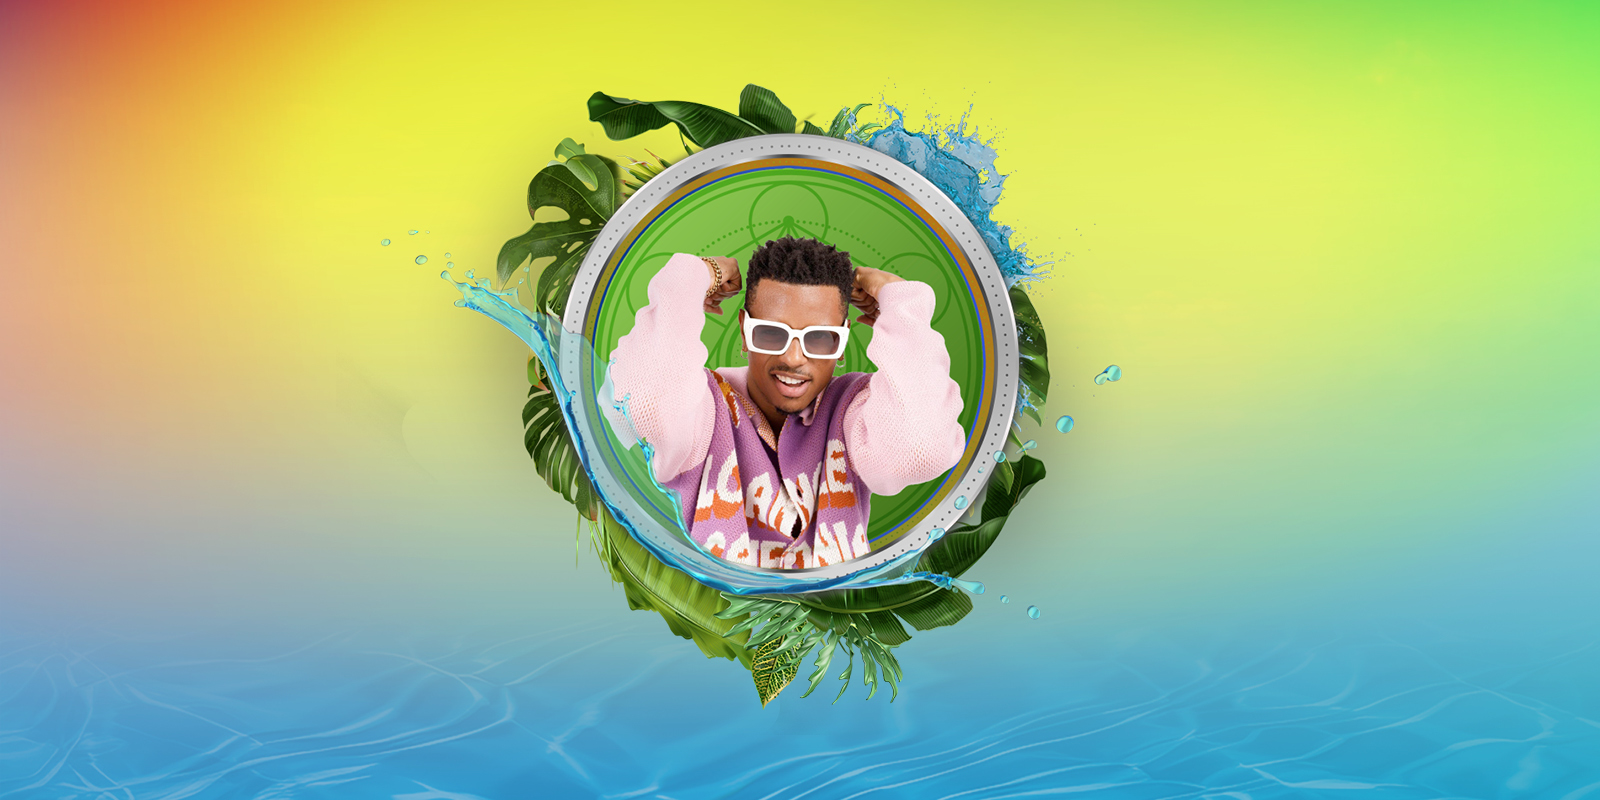 DJ Soca and Puffy creative for Reggae Nights showing a water esthetic